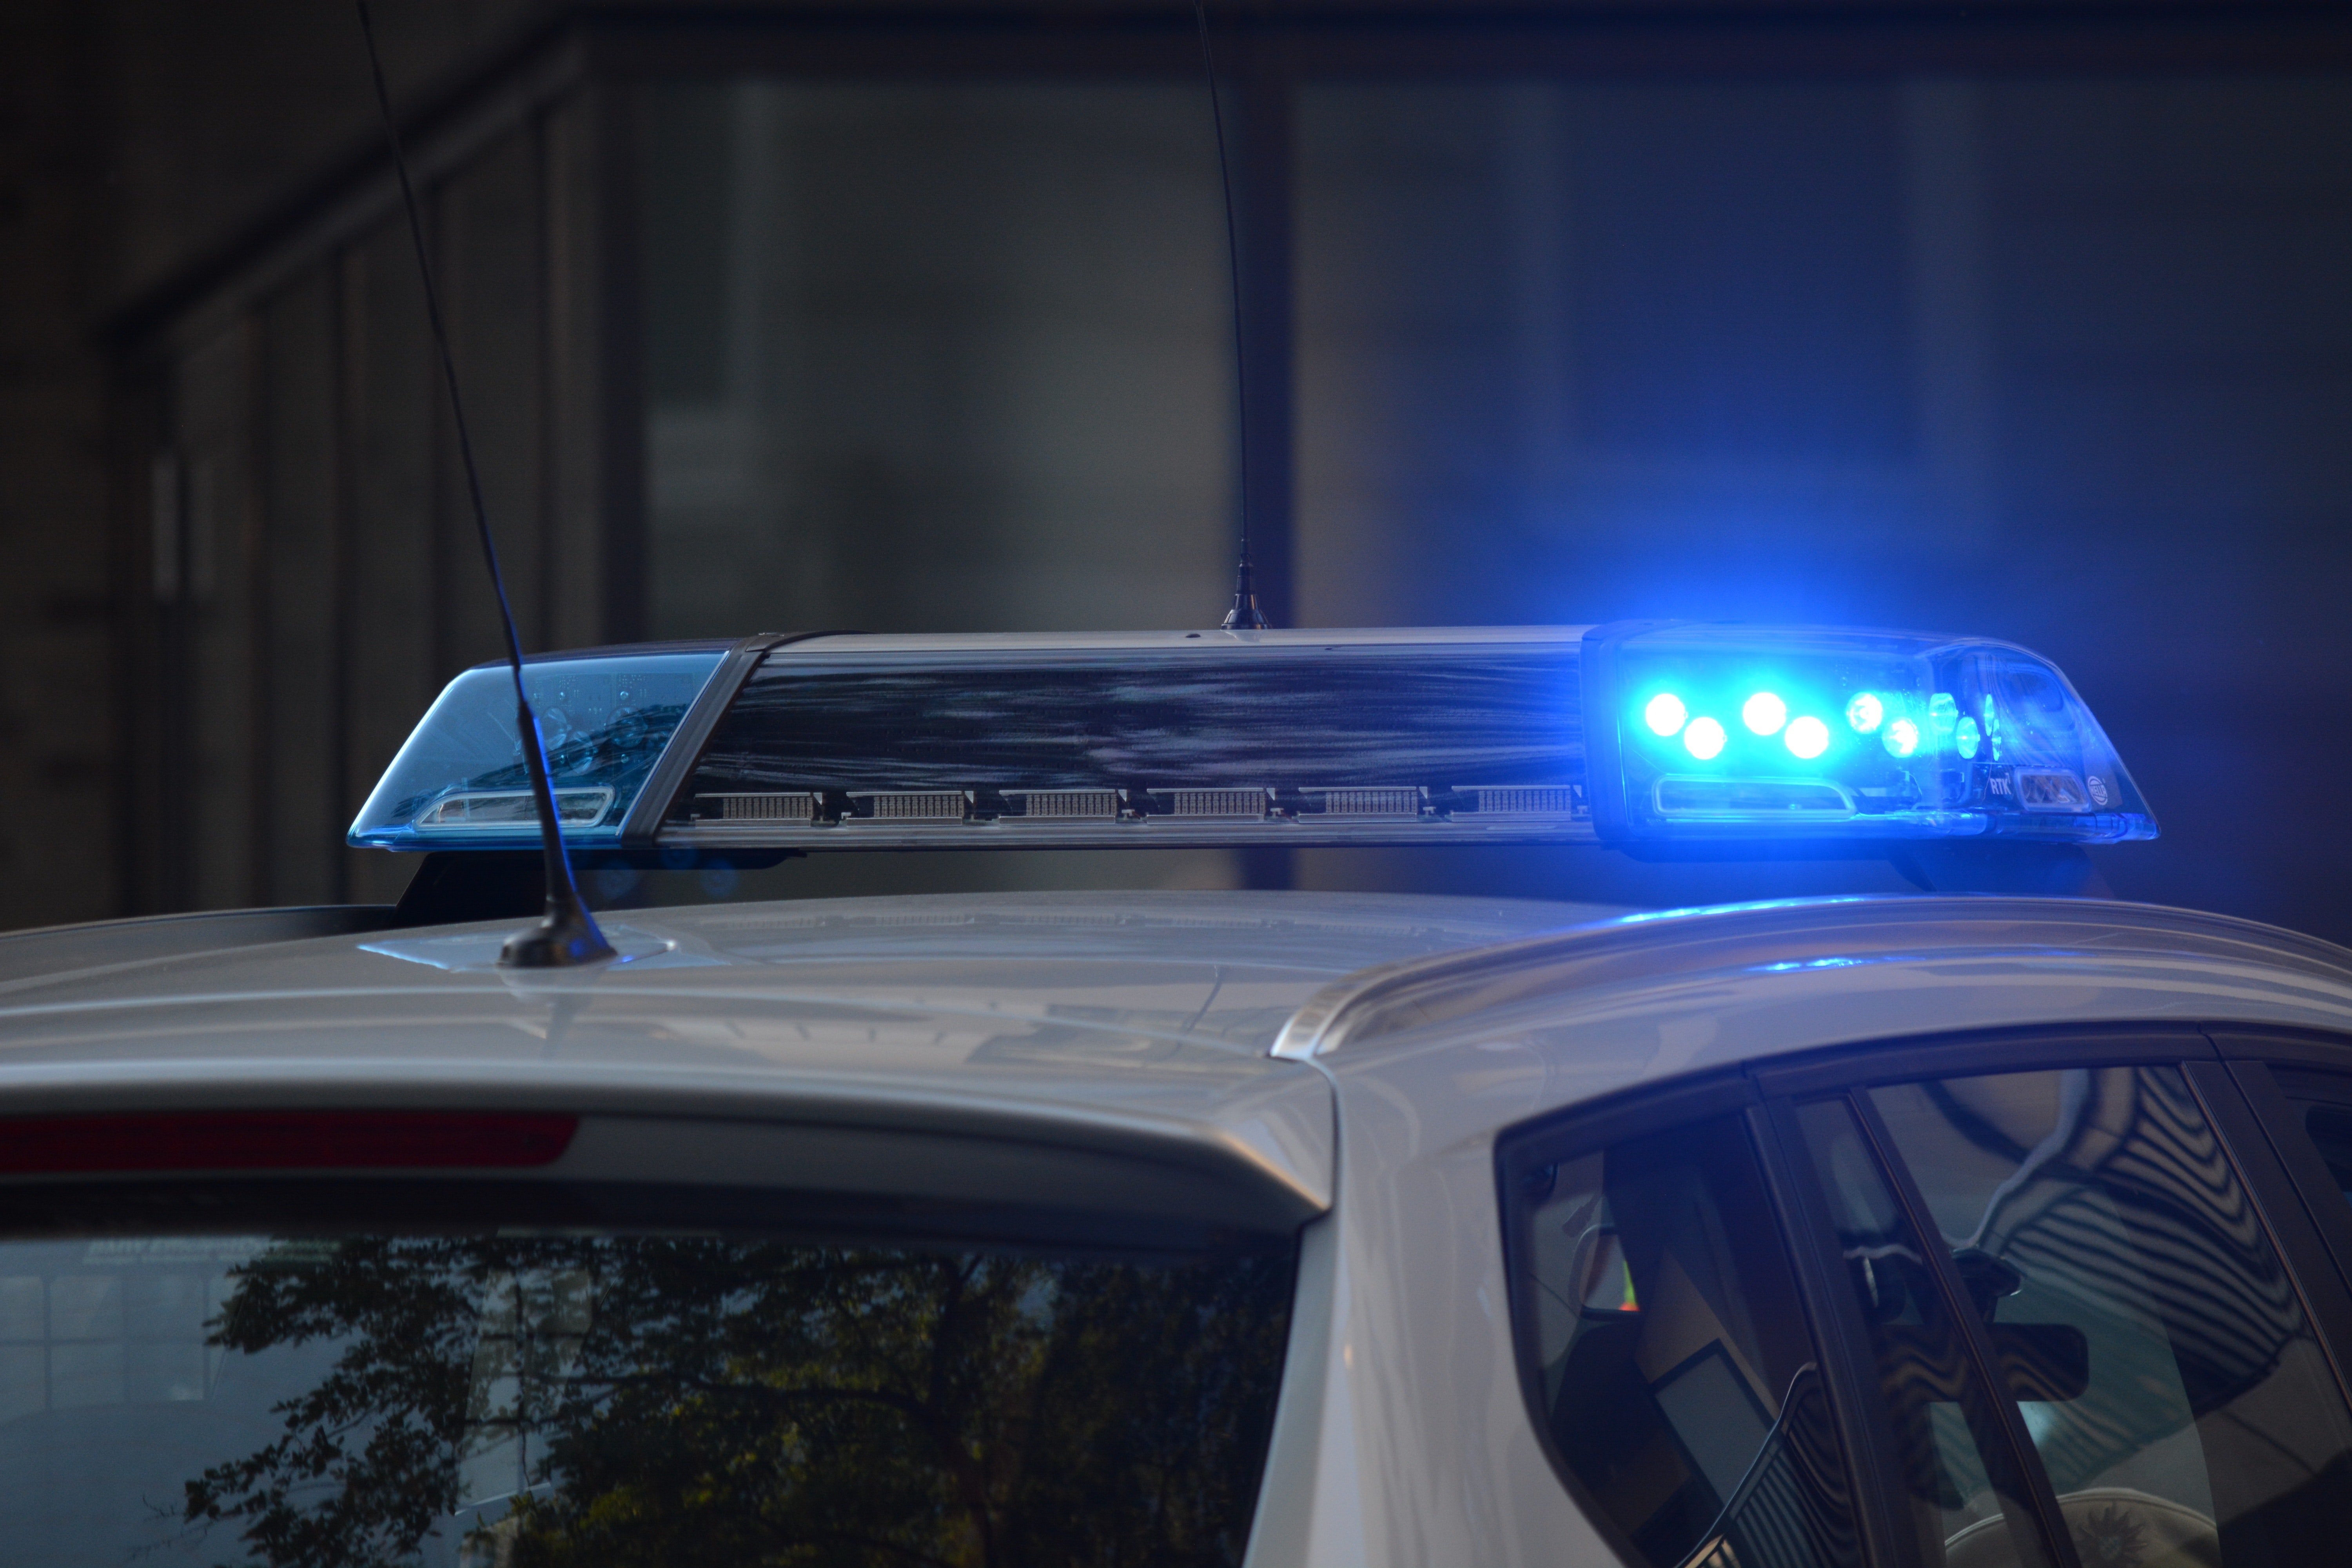 A police car with its siren on | Source: Pexels